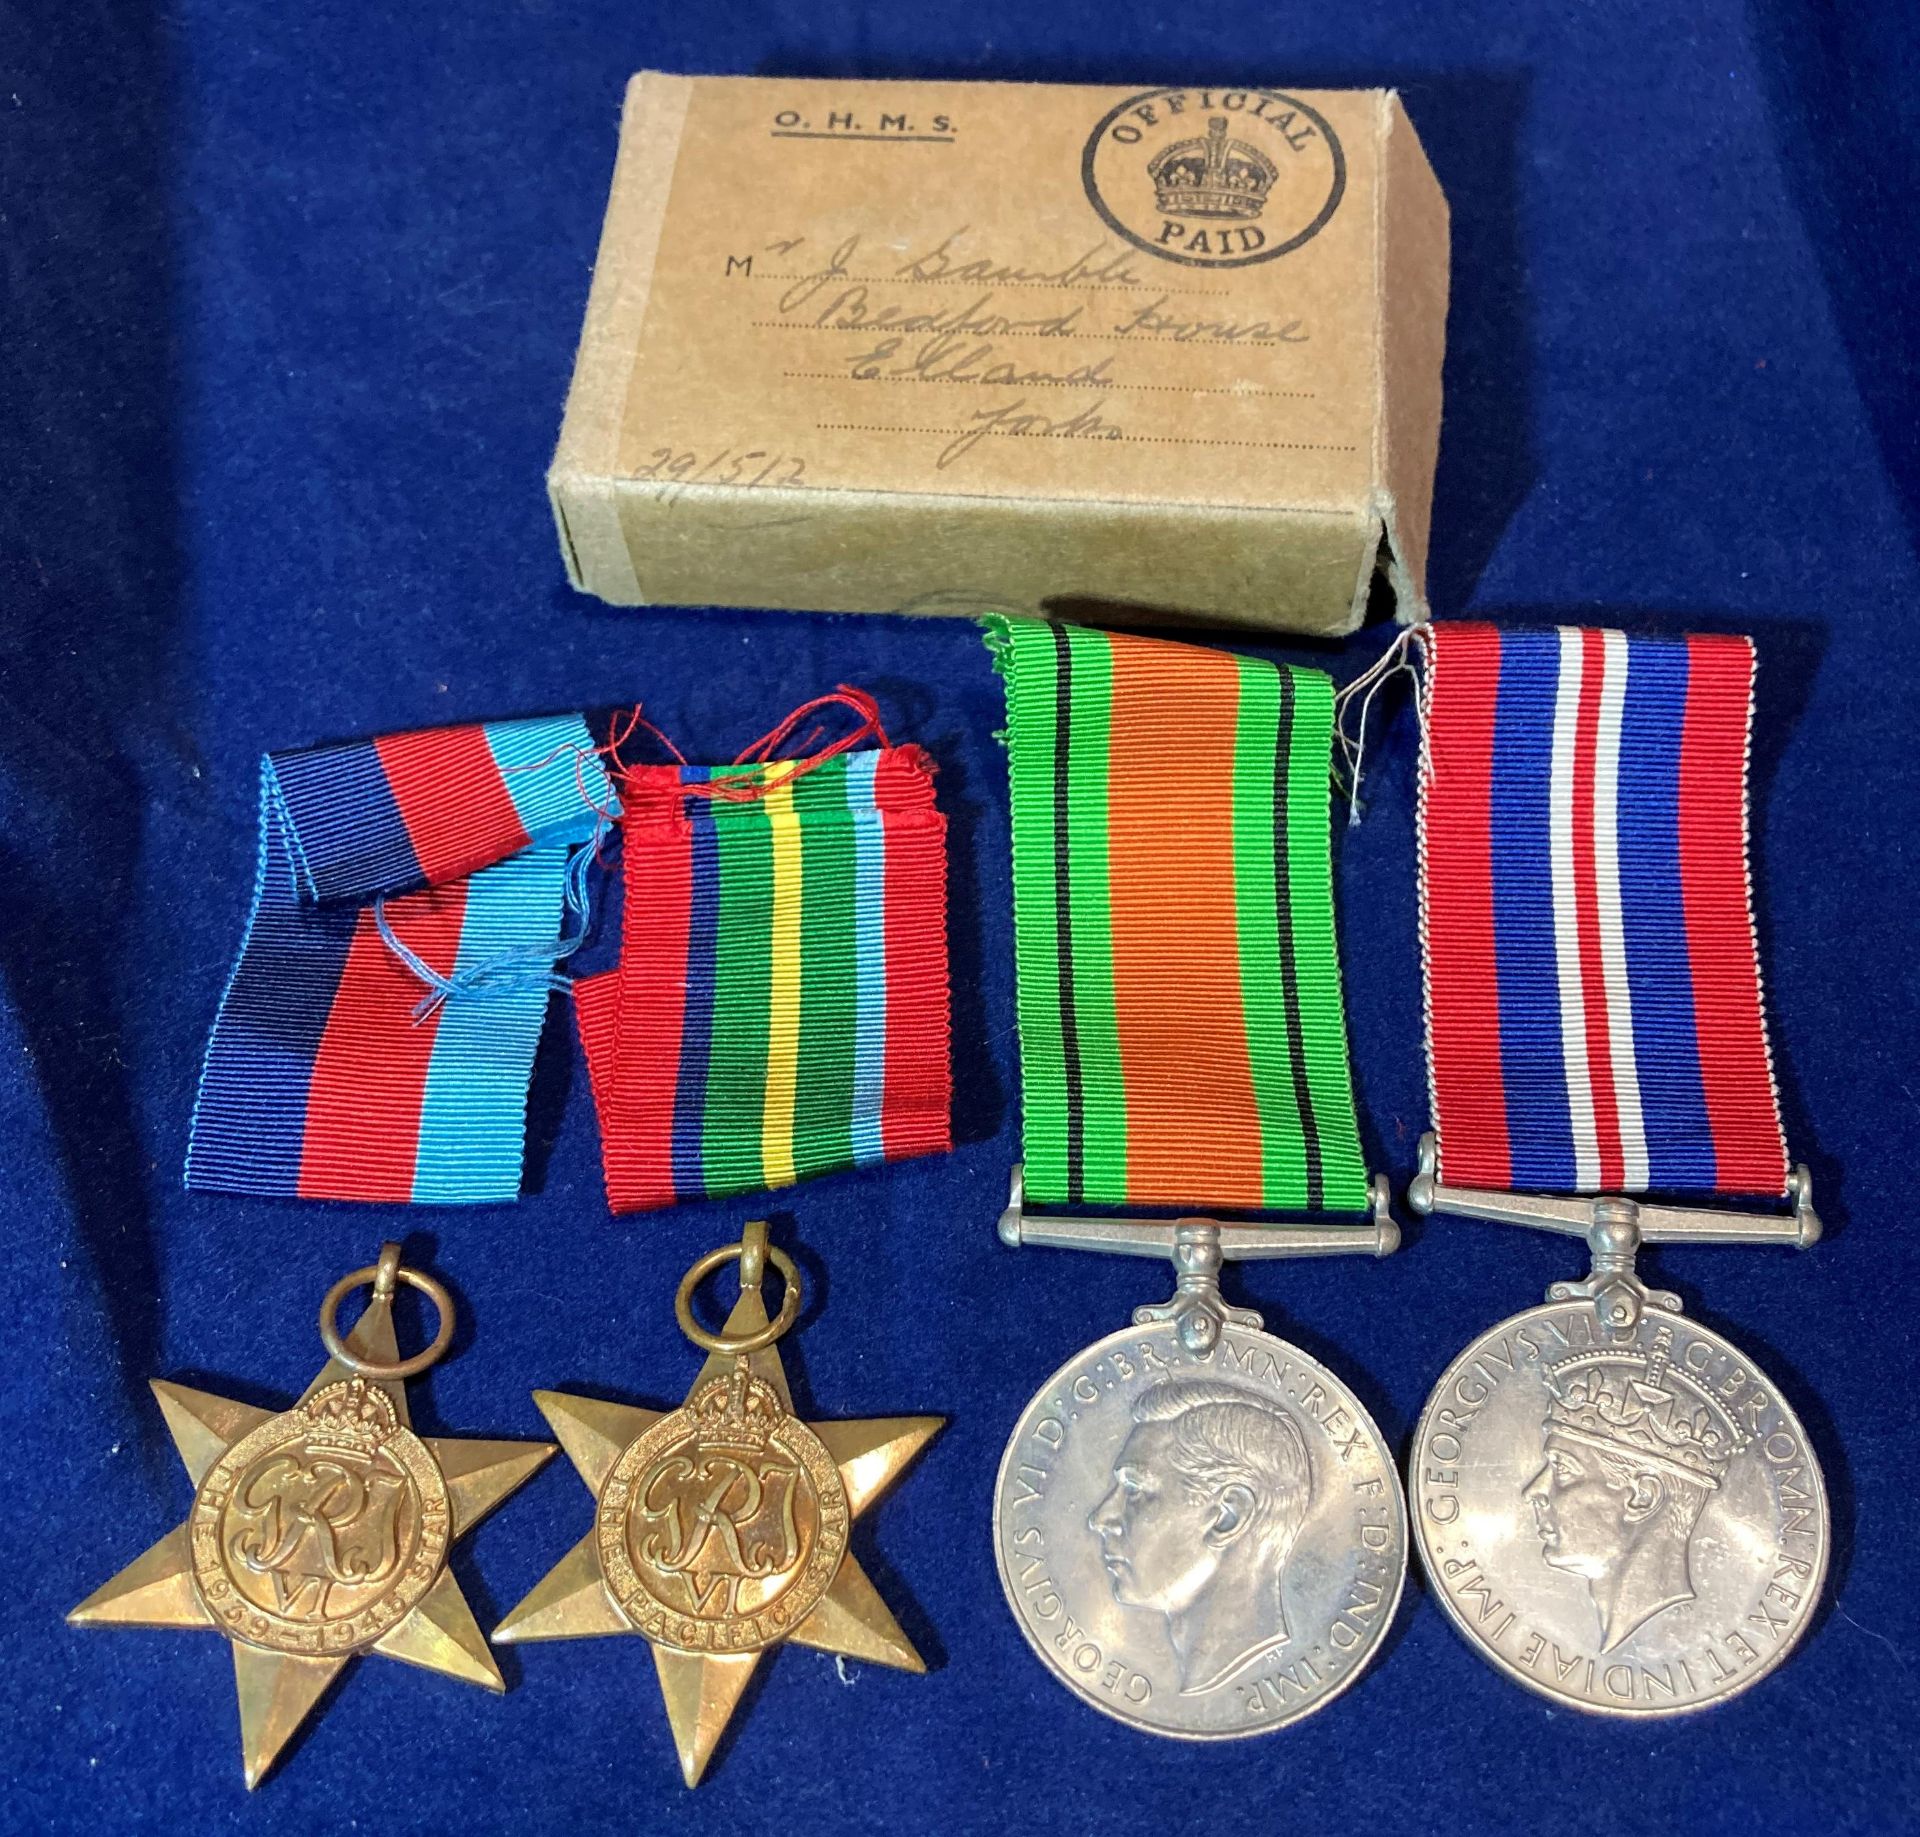 Contents to tray - two First World War medals - British World War Medal 1914-1918 and Victory Medal - Image 4 of 13